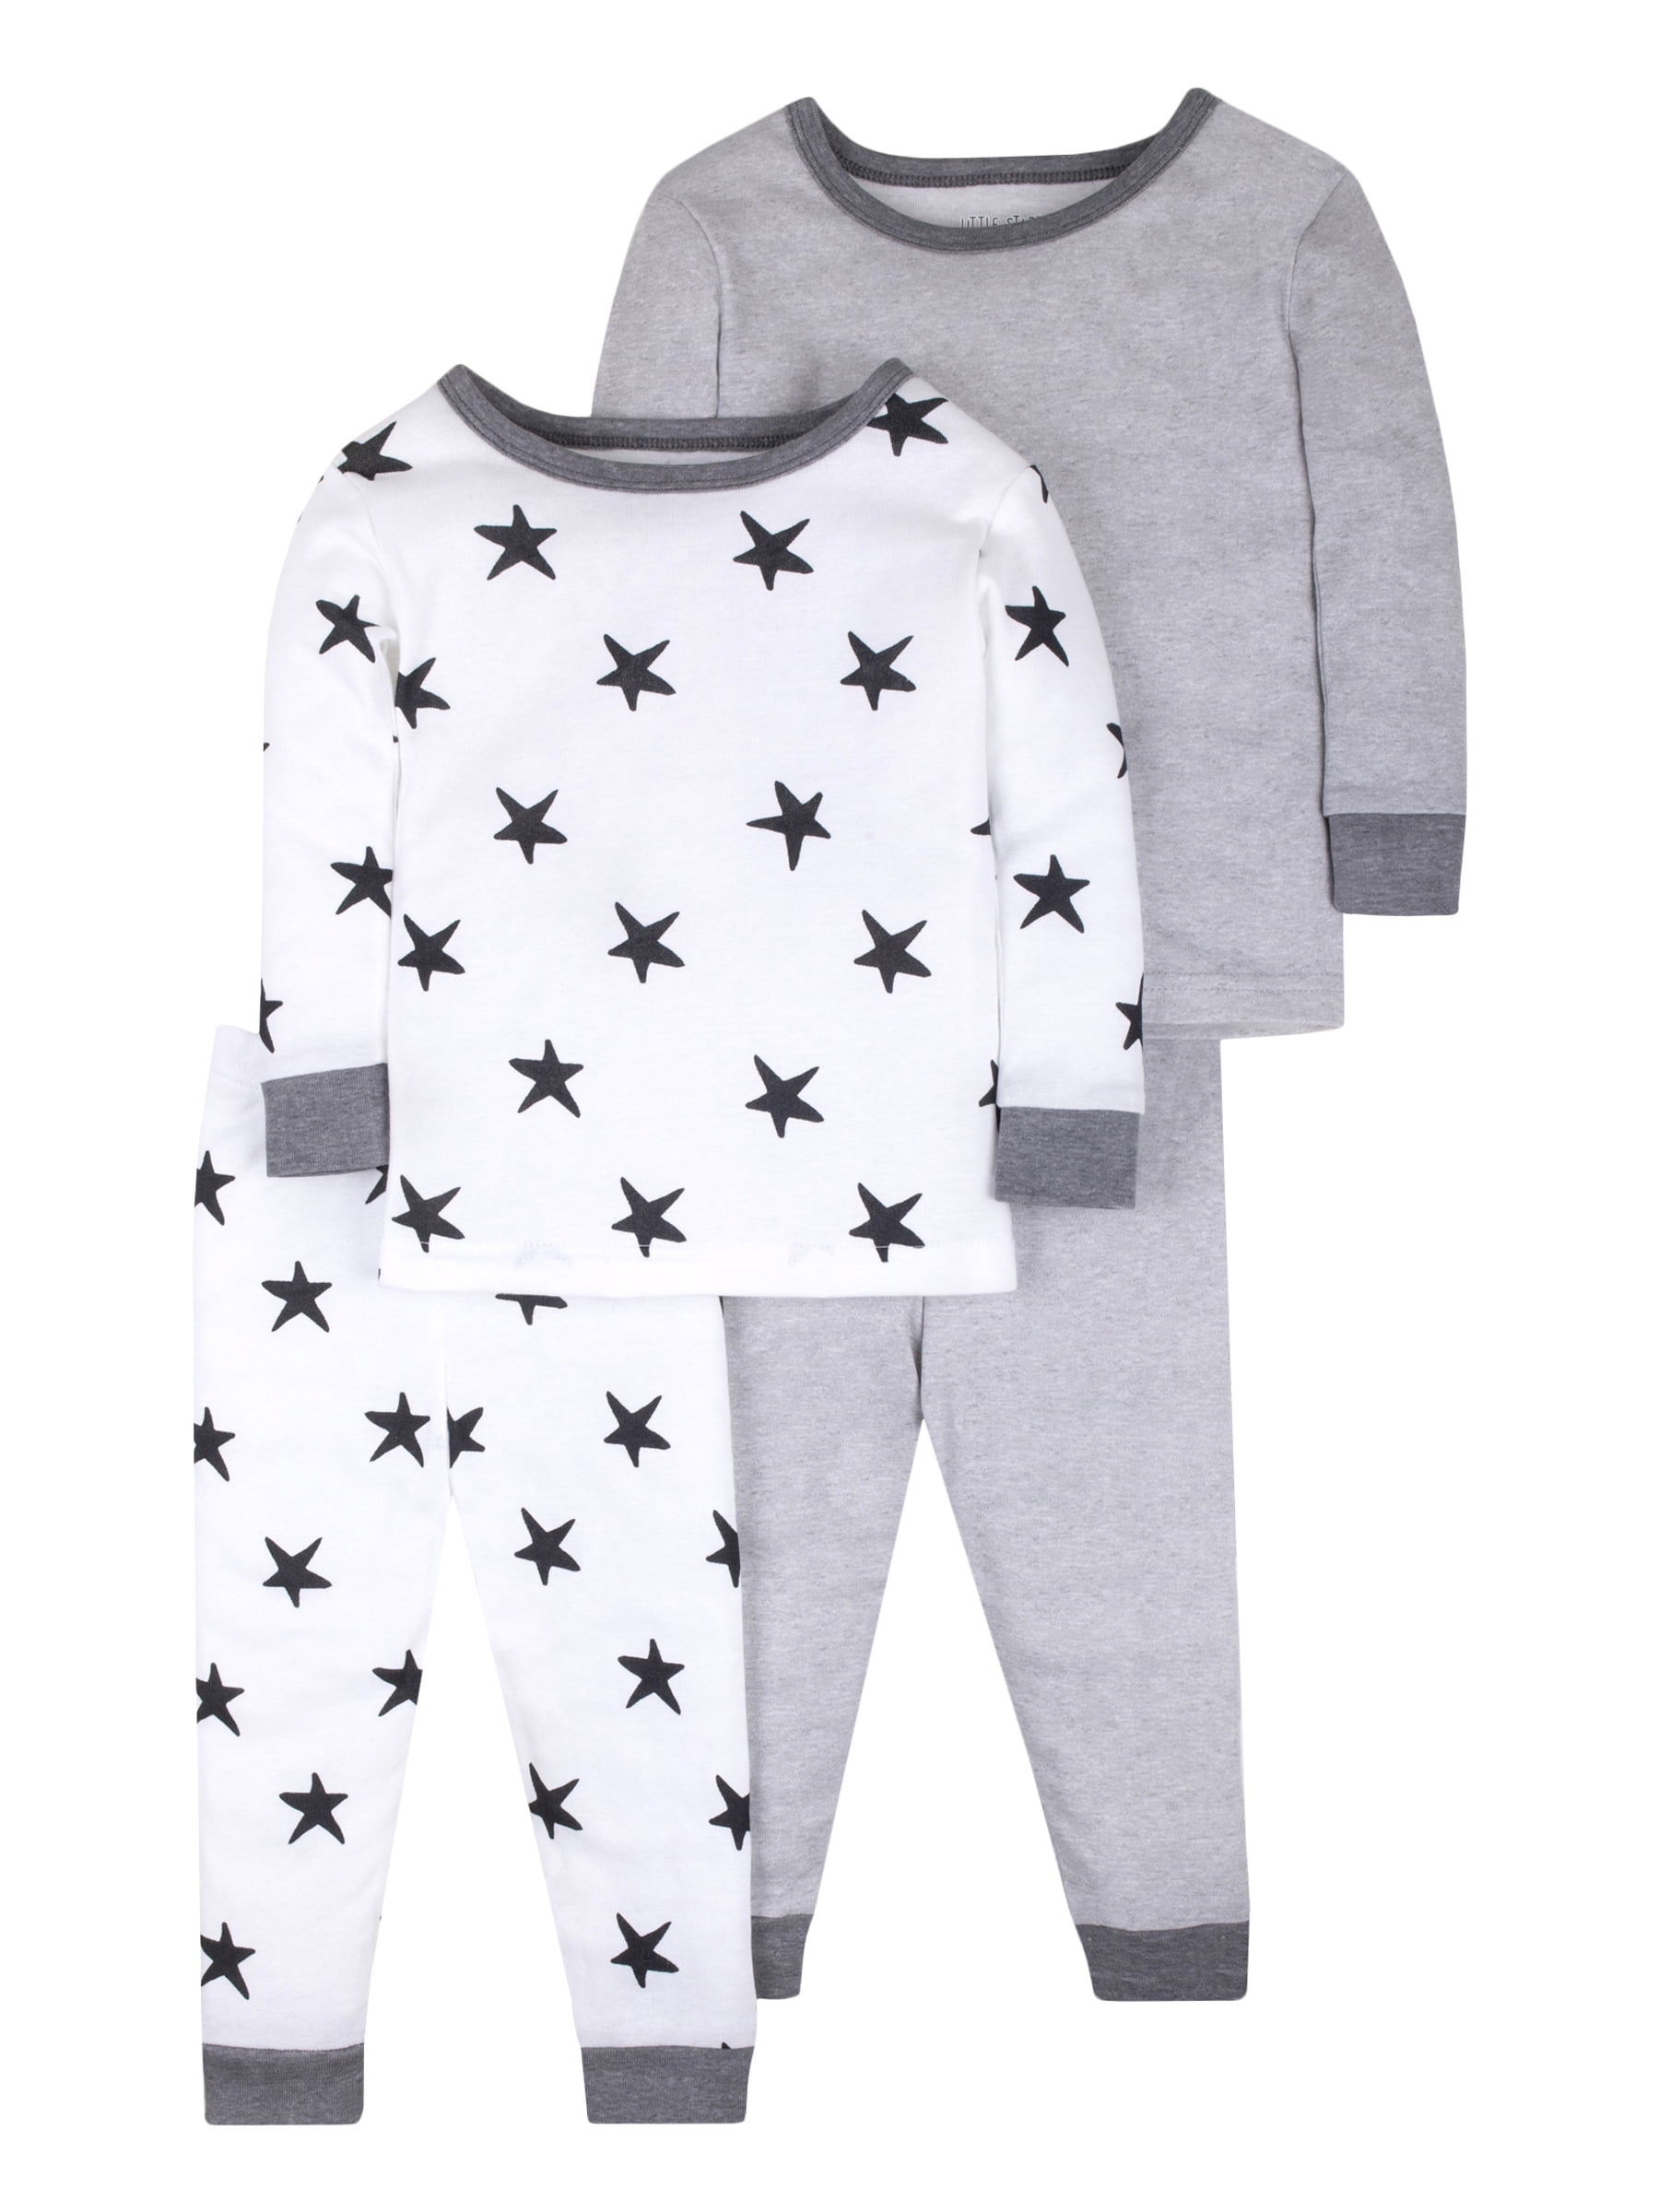 Little Star Organic Baby & Toddler Girls or Boys Brights Snug Fit Long ...